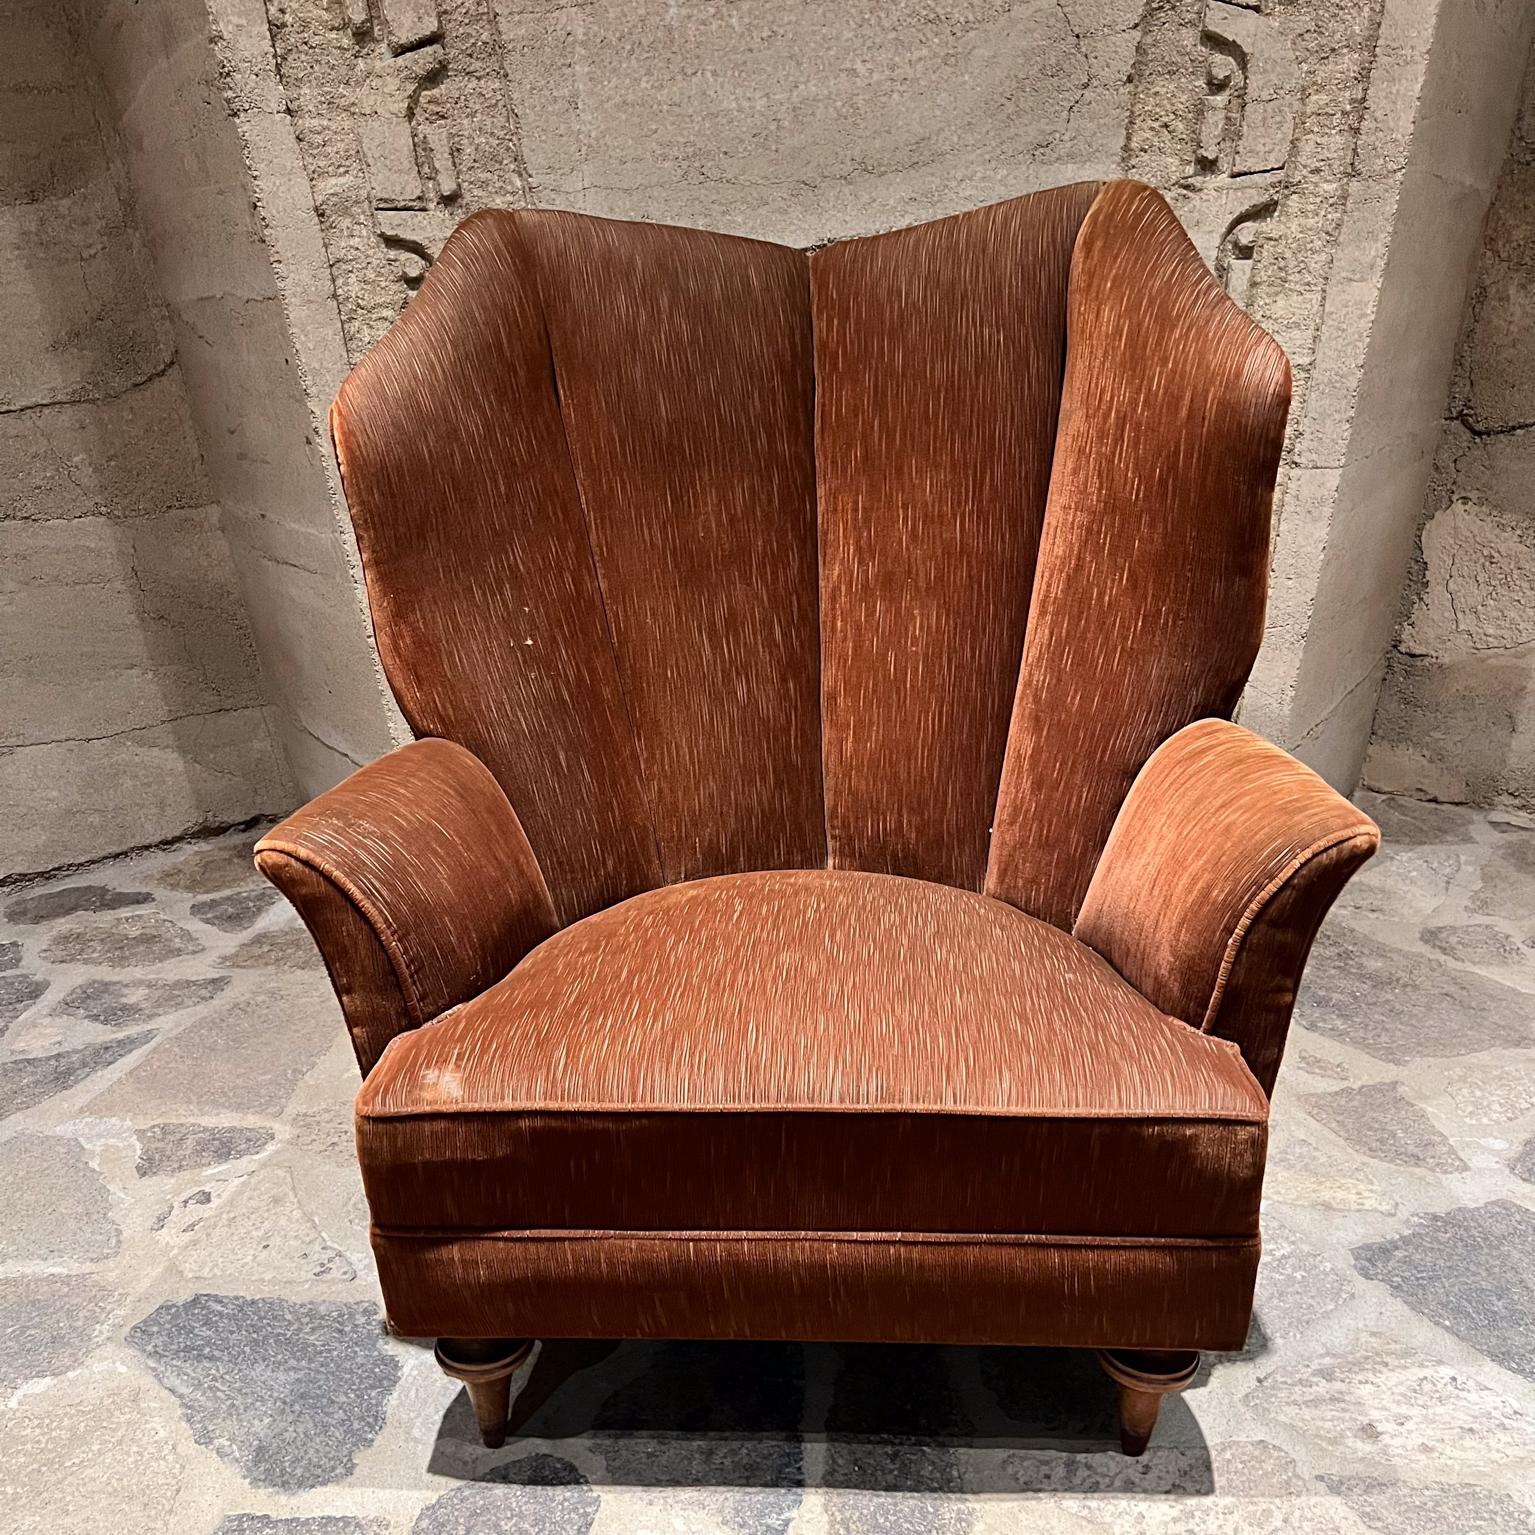 1940s Arturo Pani Sophisticated Wingback Lounge Chair Mexico City  For Sale 4